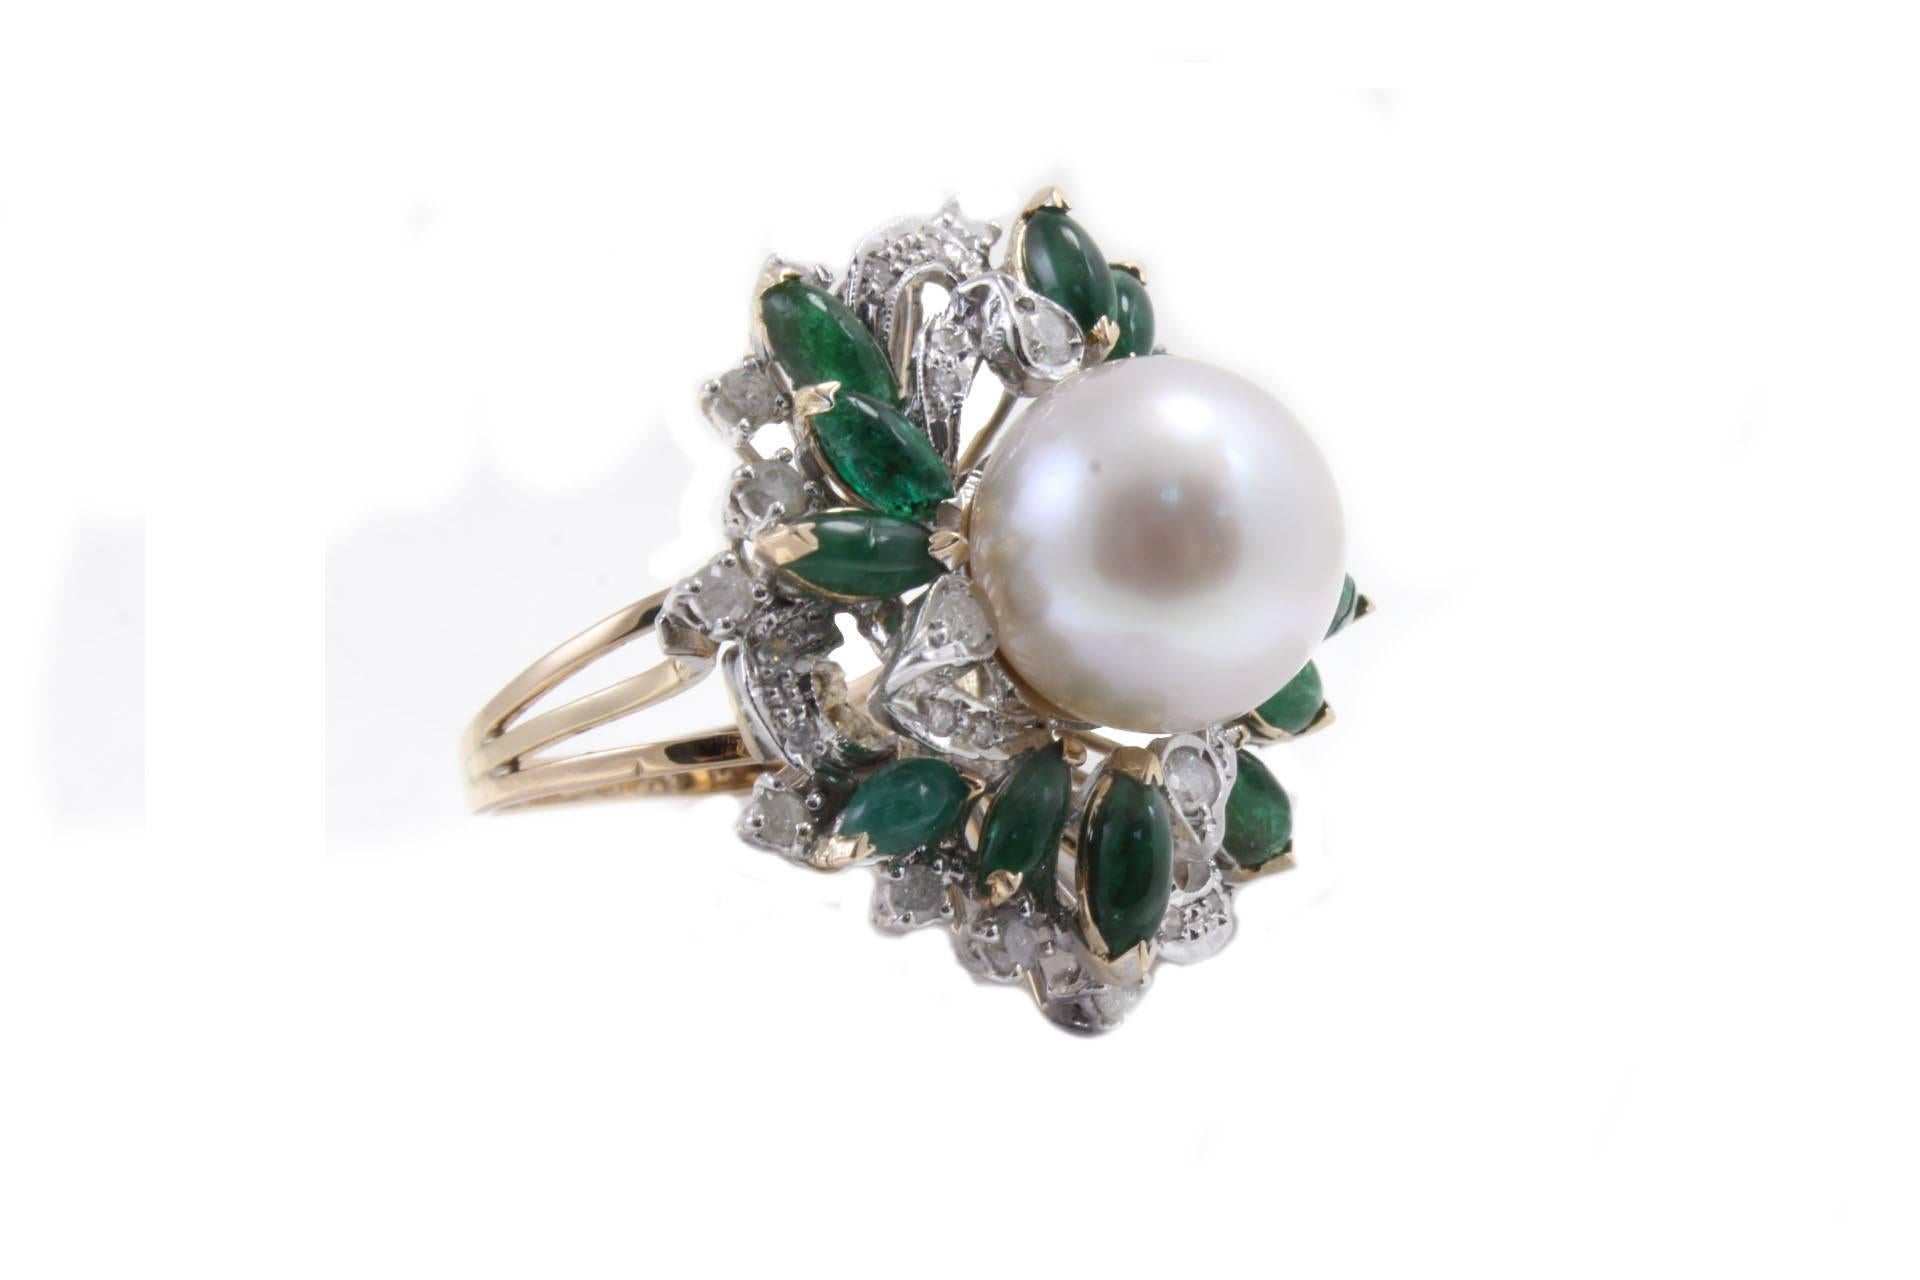 Delightful ring in 14kt yellow gold and white gold composed of a cluster of diamonds and emeralds cabochon navette cut with a australian white pearl in the center of them.

Size ring: US 8 - ITA 17 - French 57 - UK Q
Tot weight 16.6 gr
Diamonds 1.38